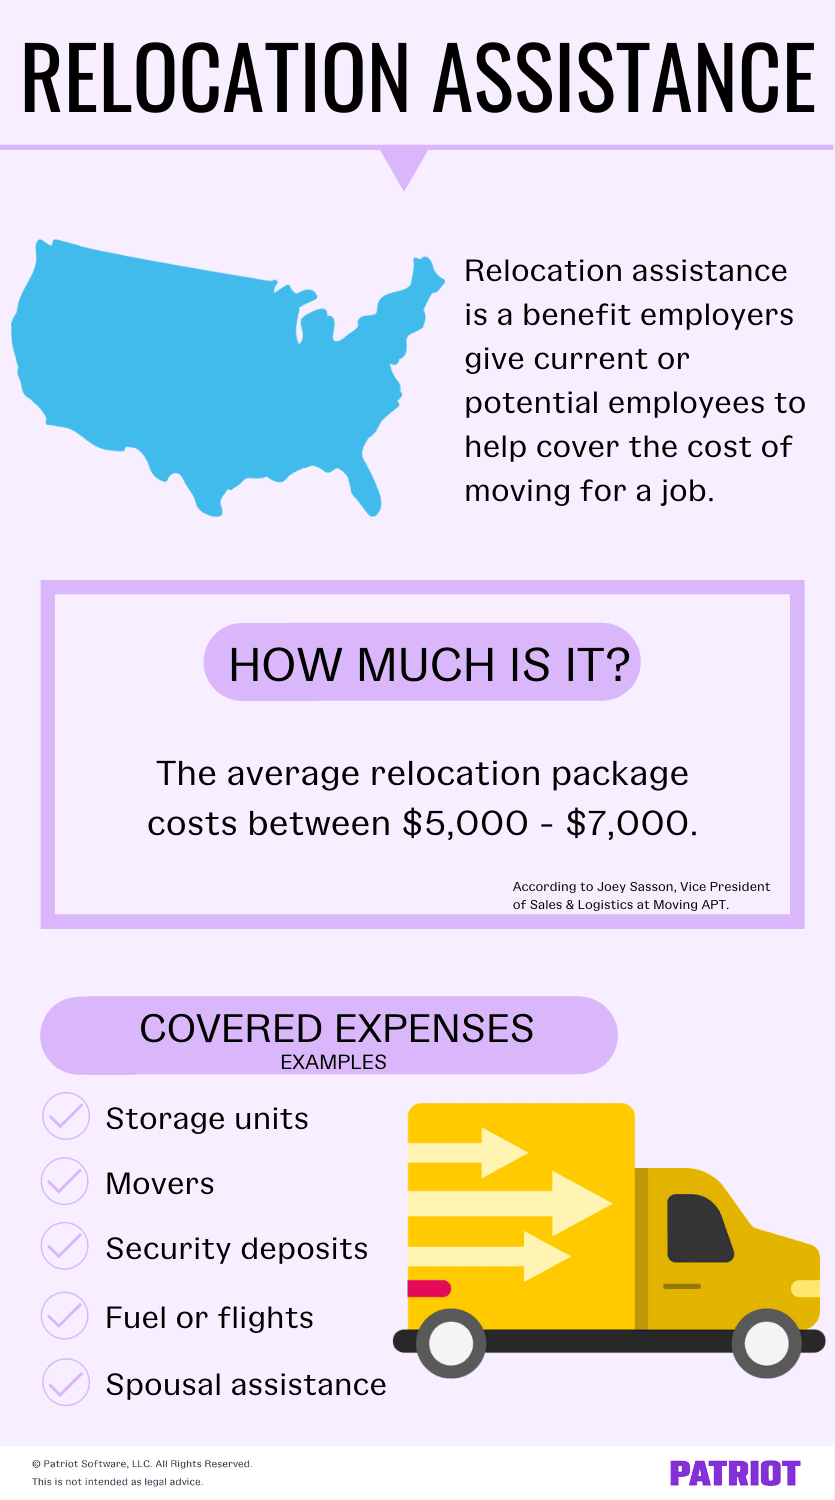 Relocation assistance is a benefit employers give current or potential employees to help cover the cost of moving for a job. The average package costs between $5,000 - $7,000 and covers expenses like storage units, movers, security deposits, fuel or flights, and spousal assistance.